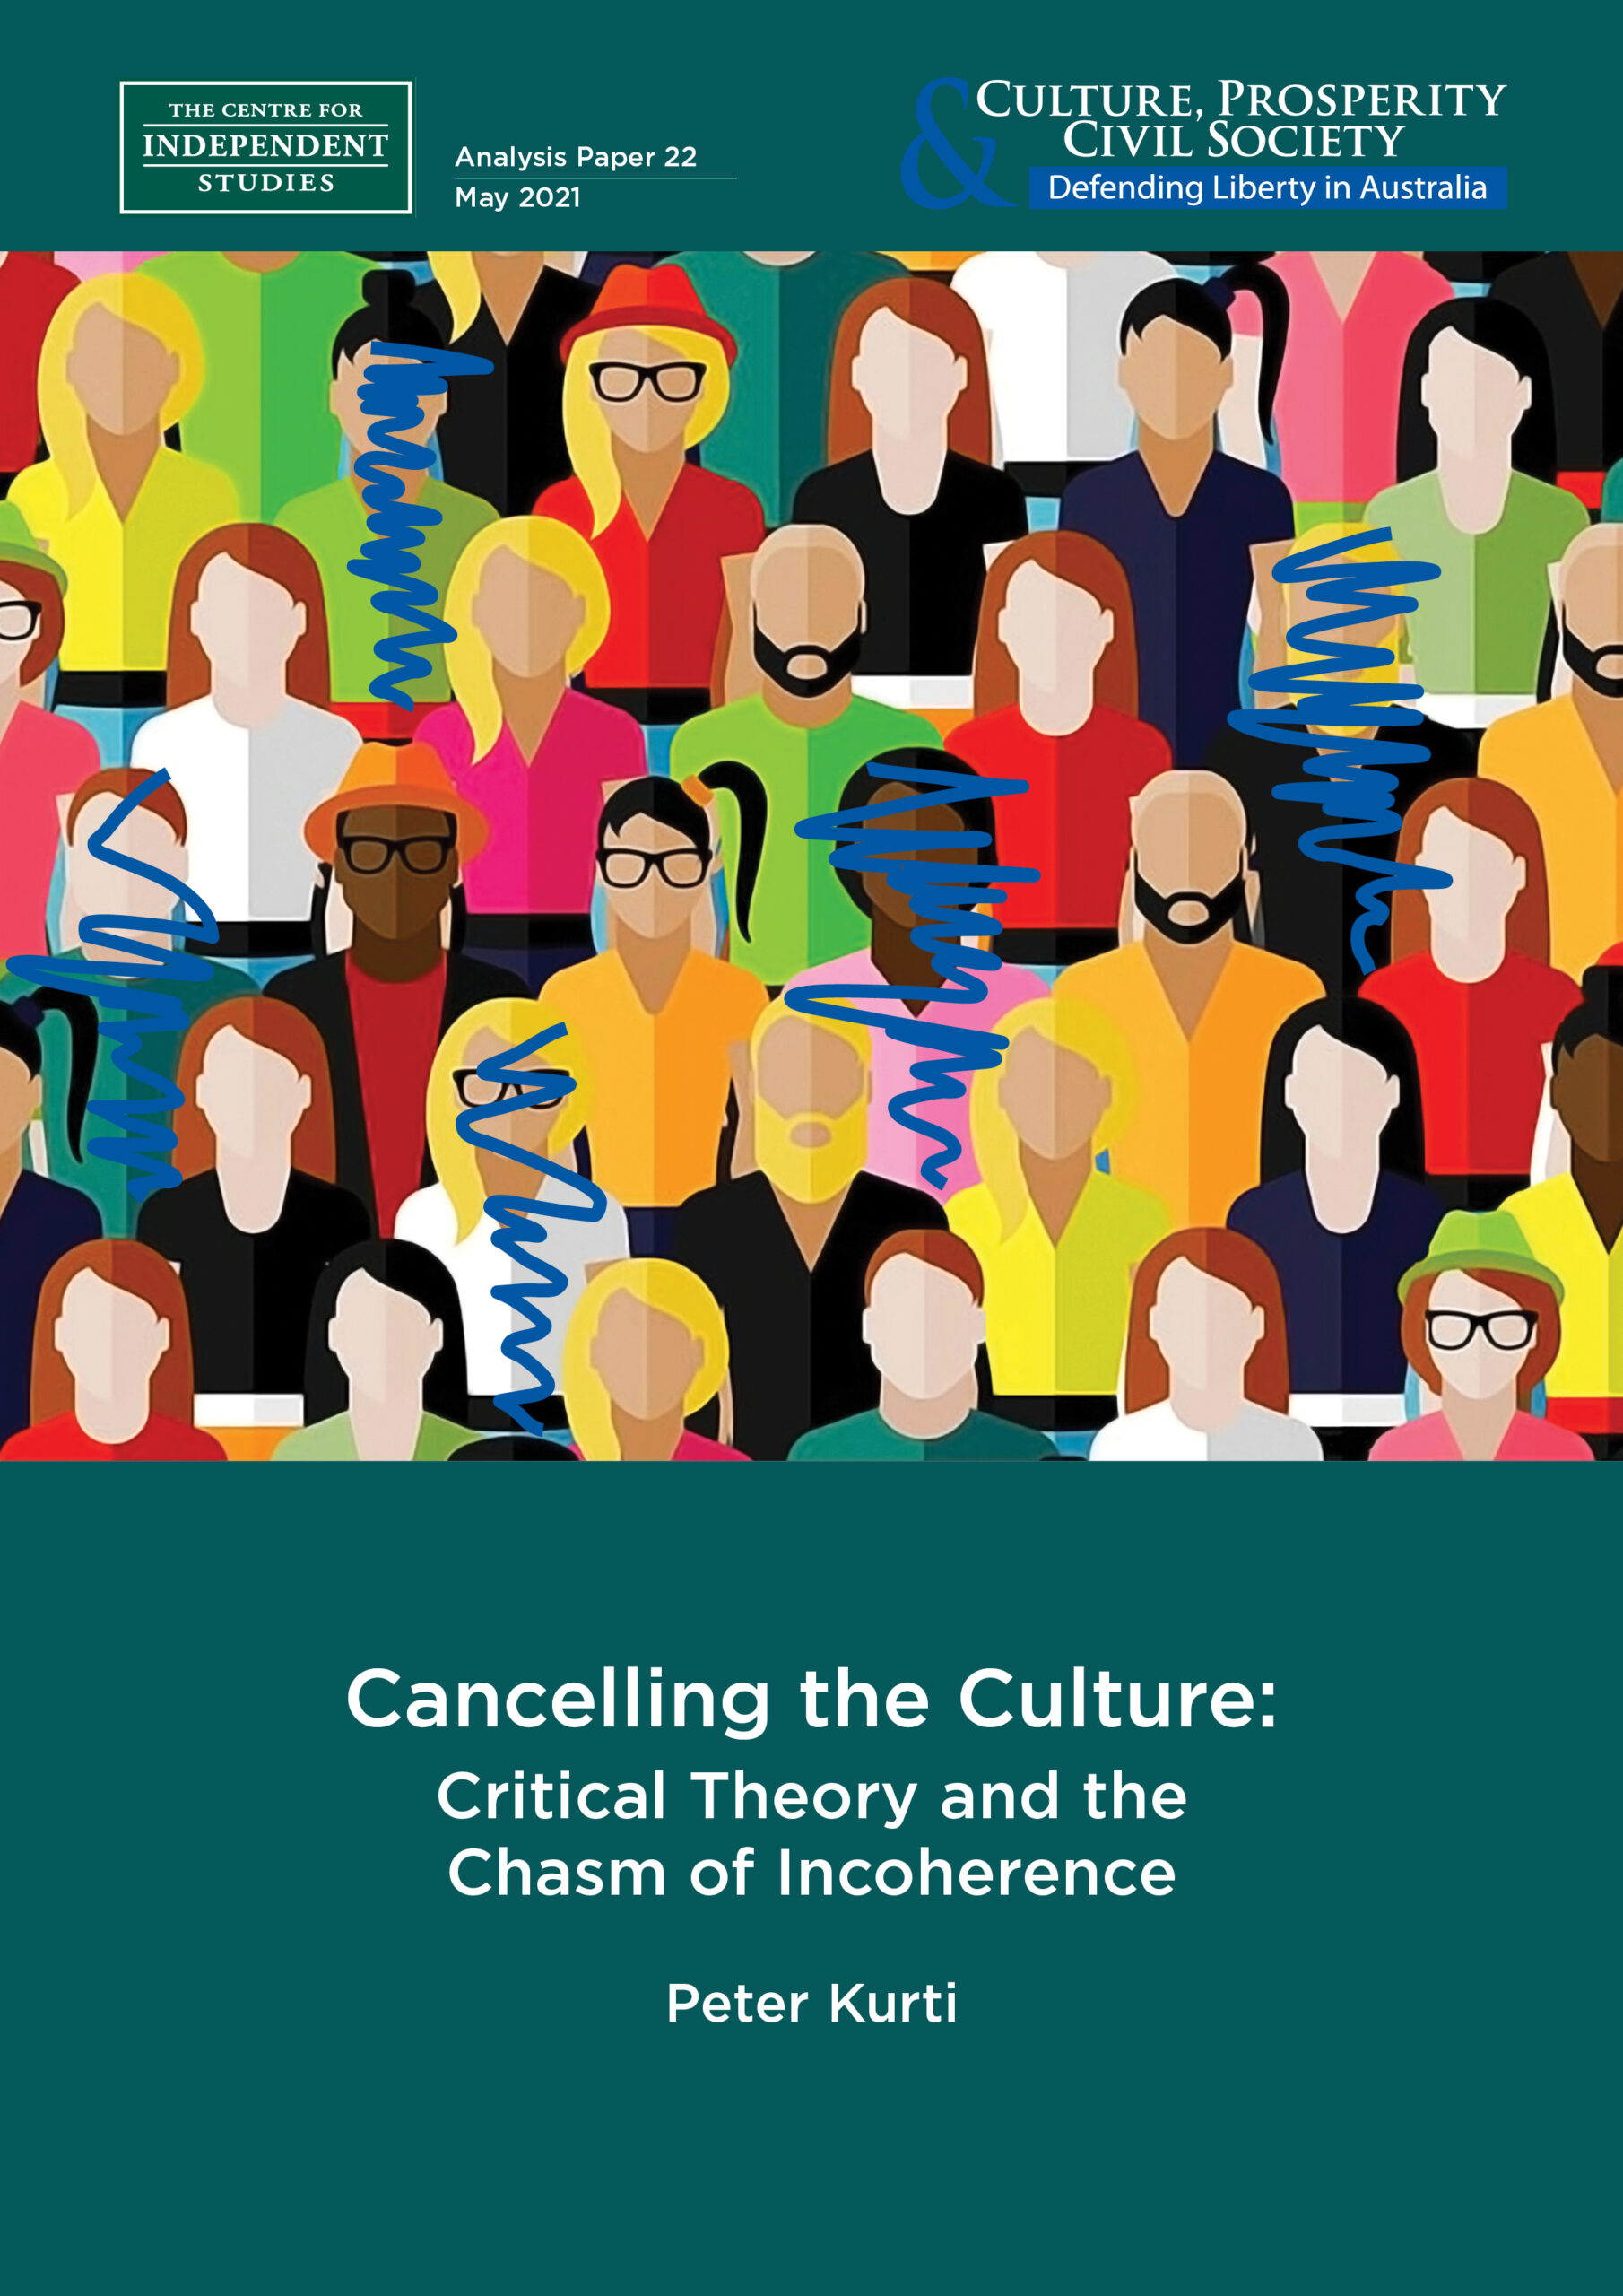 Cancelling the Culture: Critical Theory and the Chasm of Incoherence